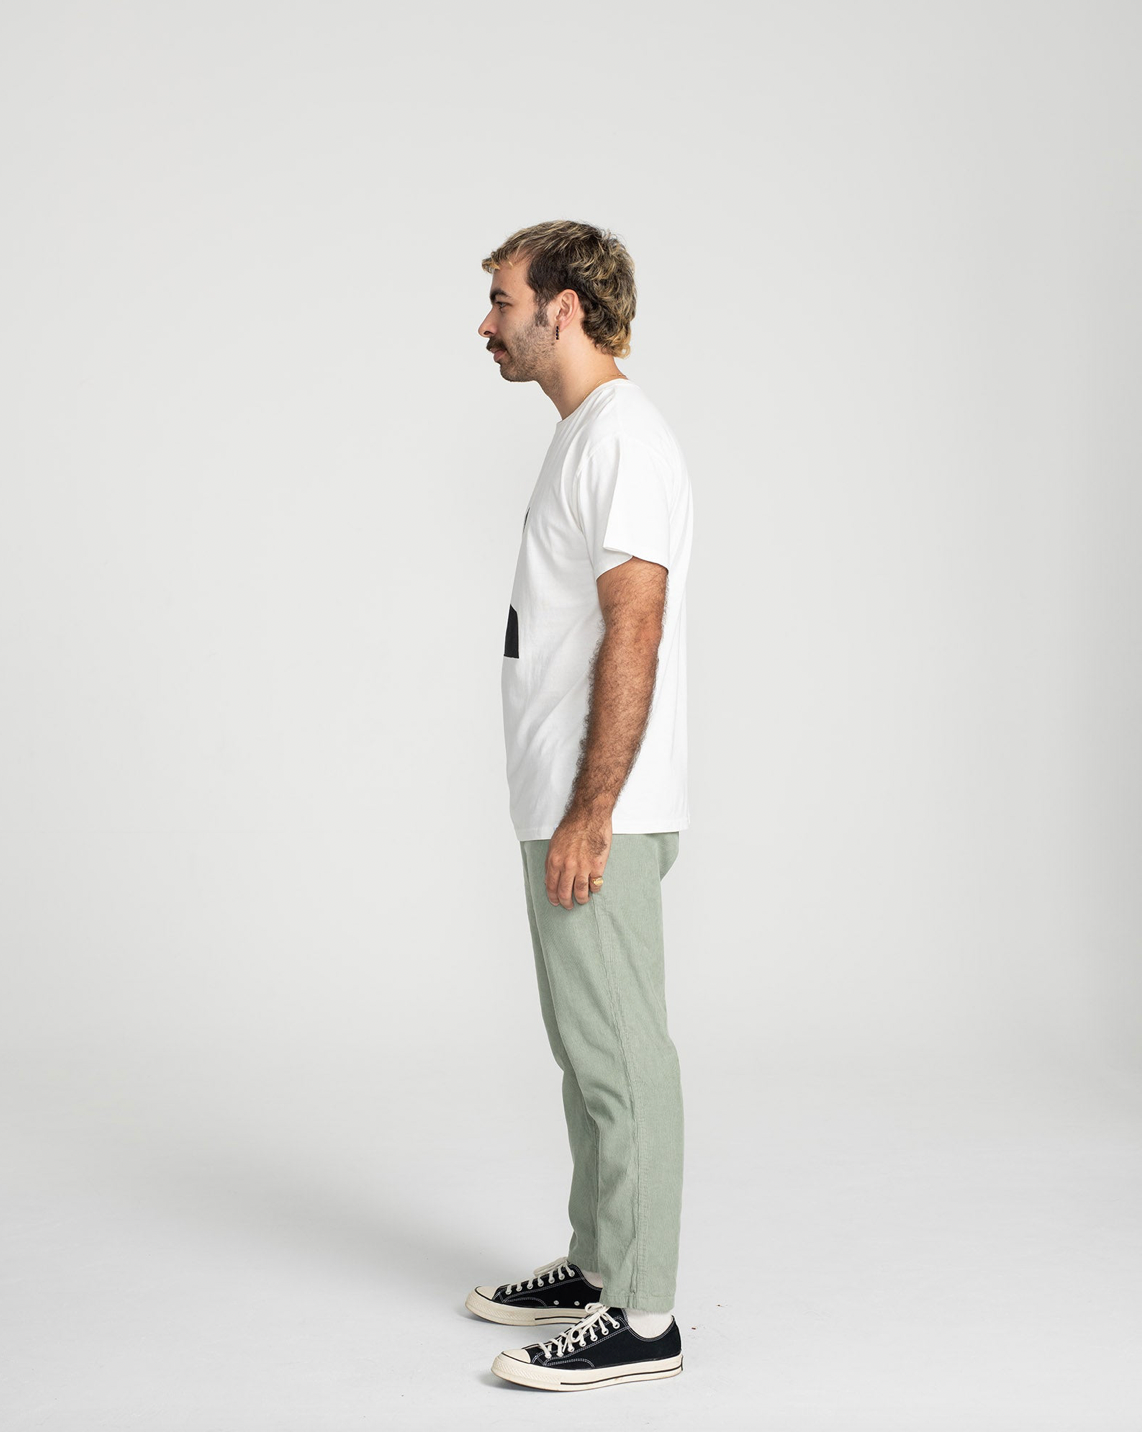 All Day Corduroy Pant - SEAGRASS